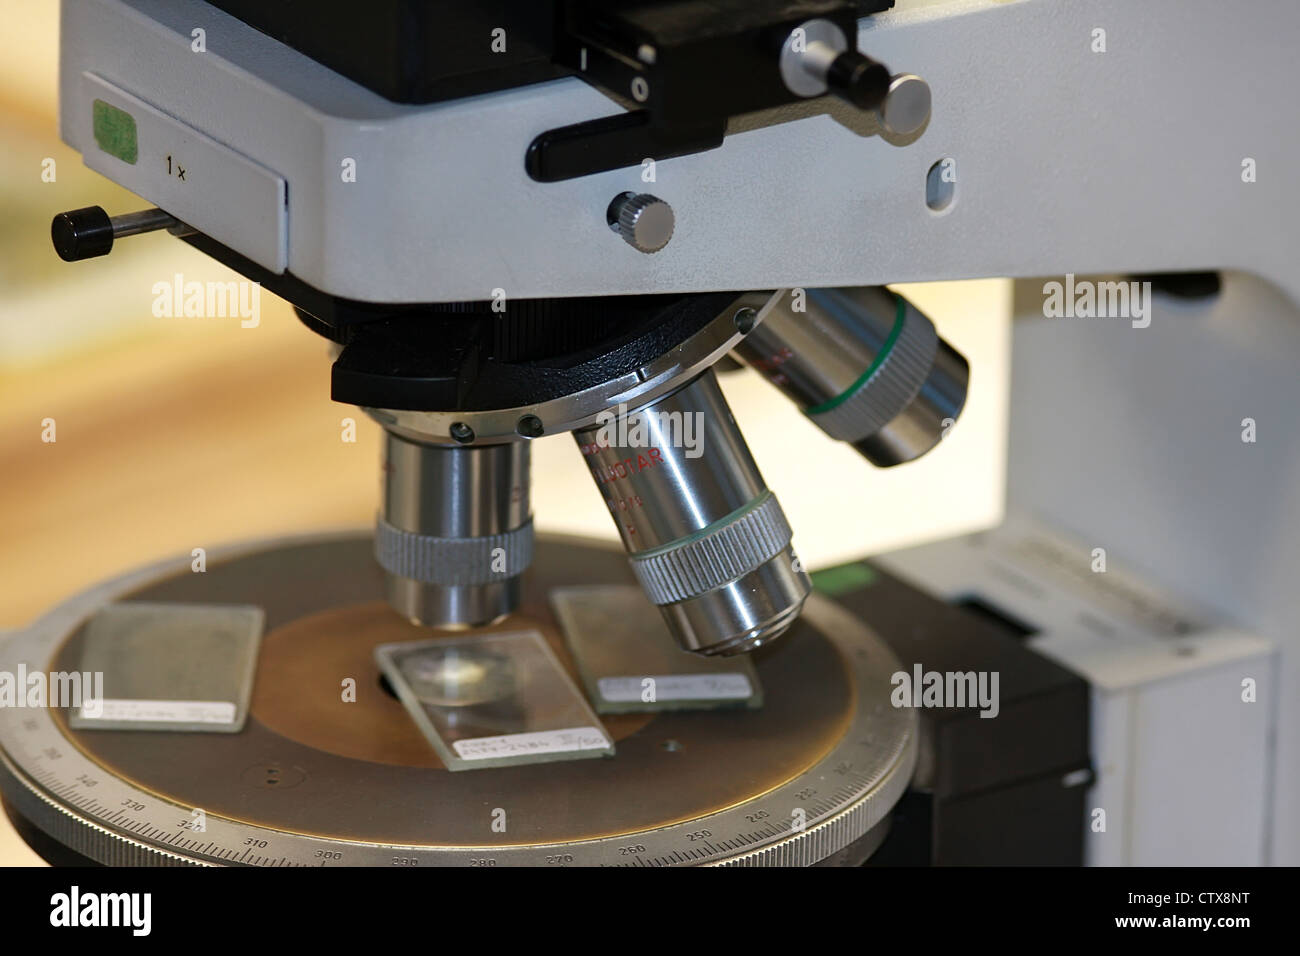 Closeup detail of the microscope in the lab Stock Photo